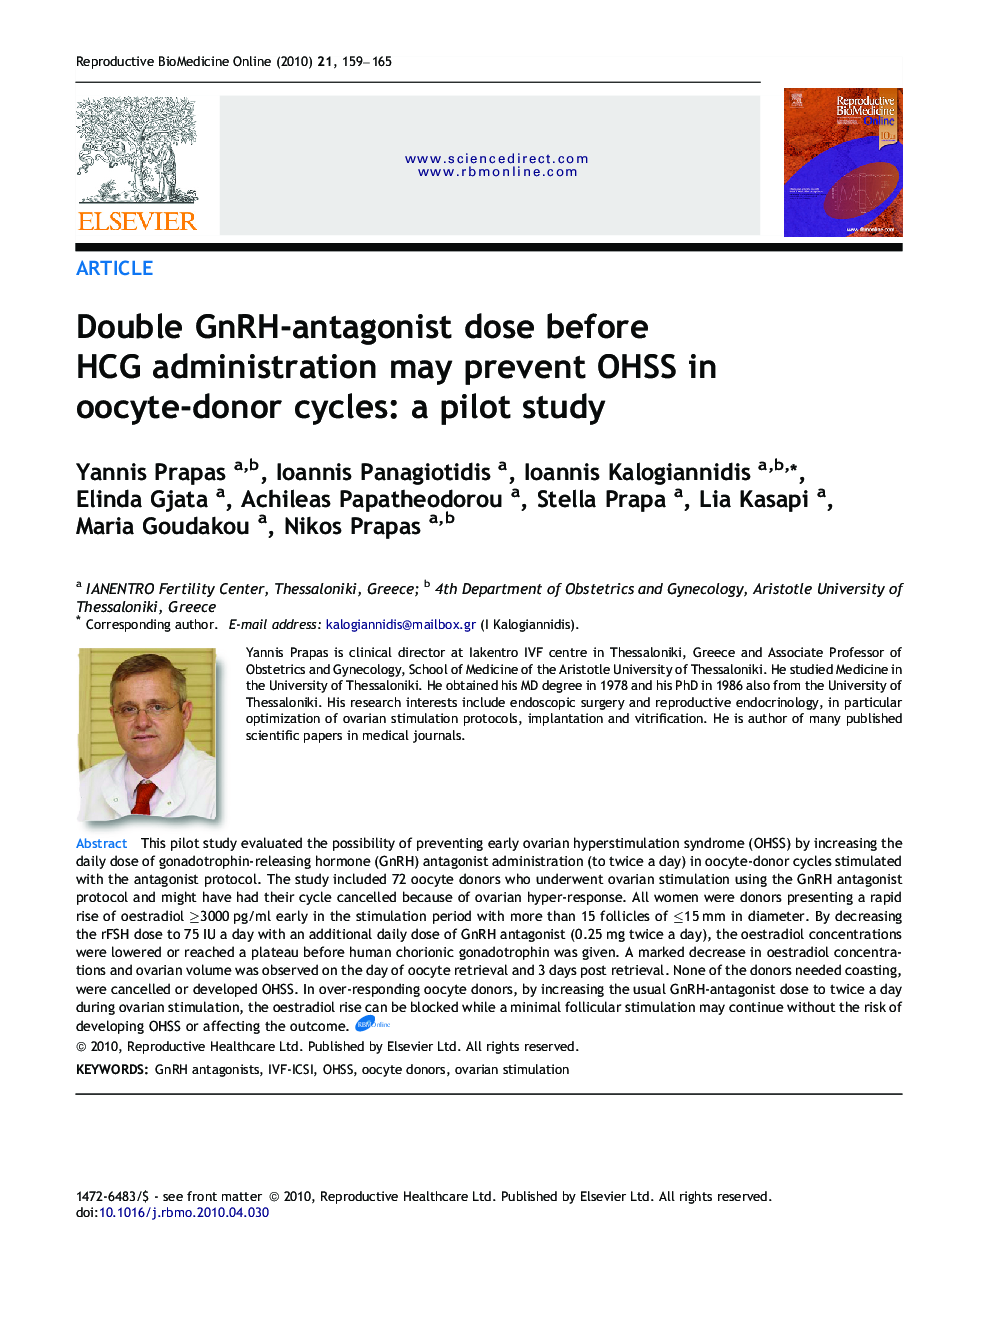 Double GnRH-antagonist dose before HCG administration may prevent OHSS in oocyte-donor cycles: a pilot study 